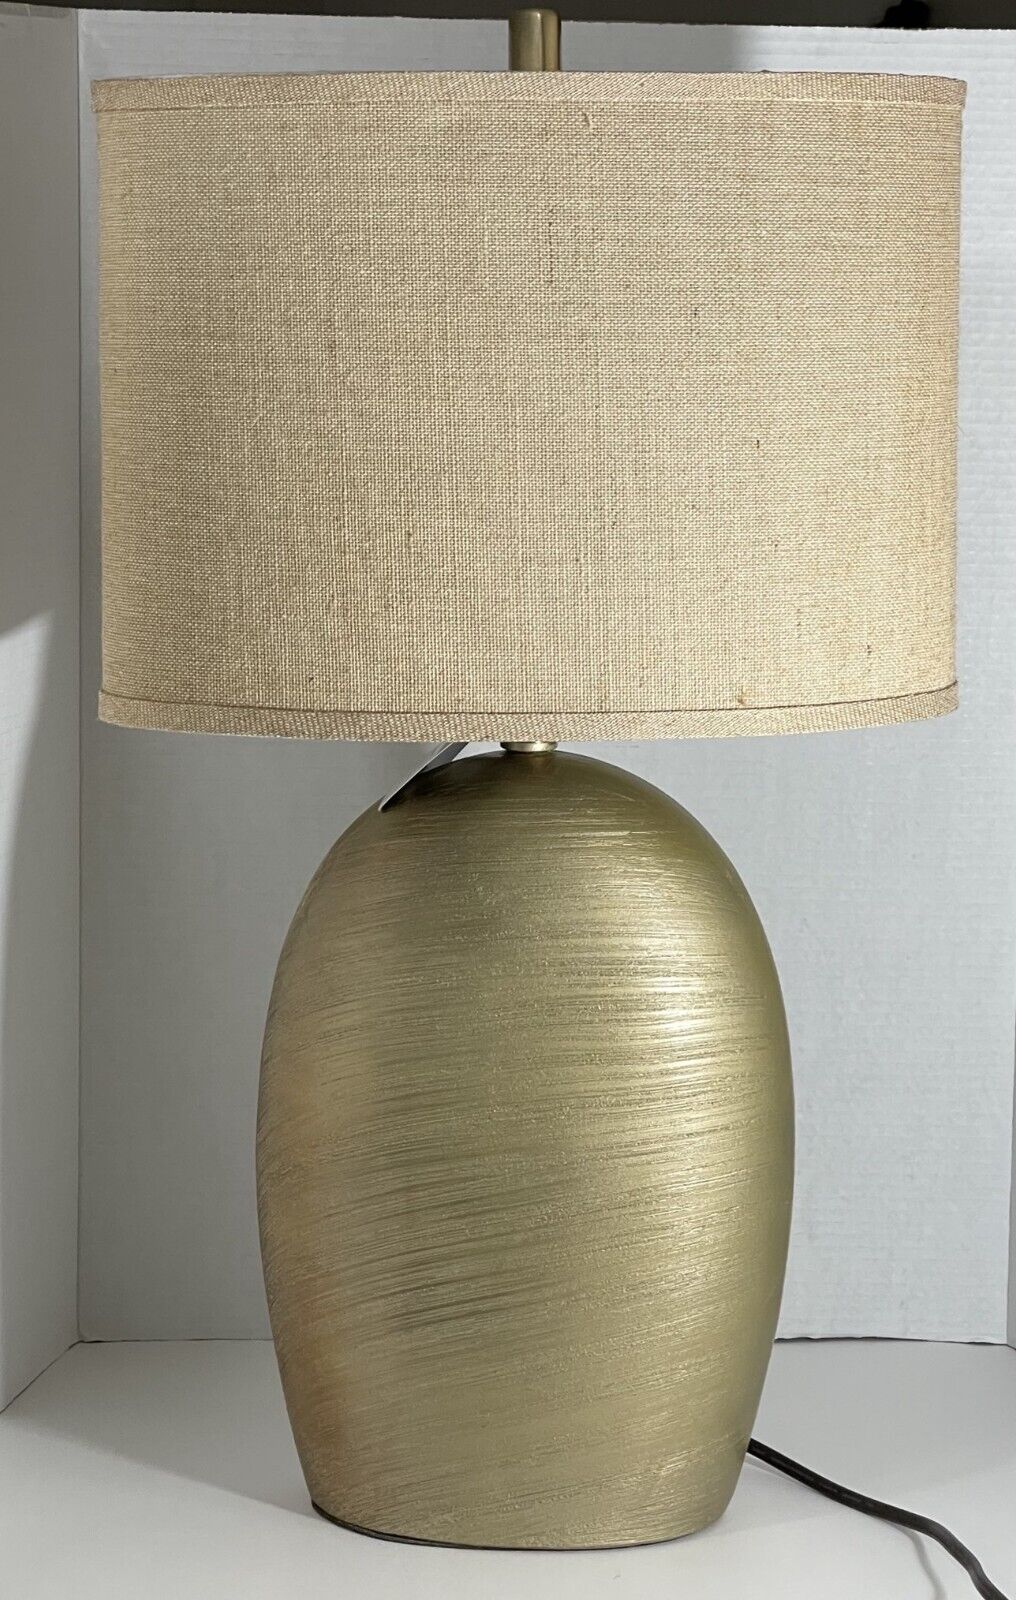 Ashley Furniture Ceramic Table Lamp Gold tone and Shade New